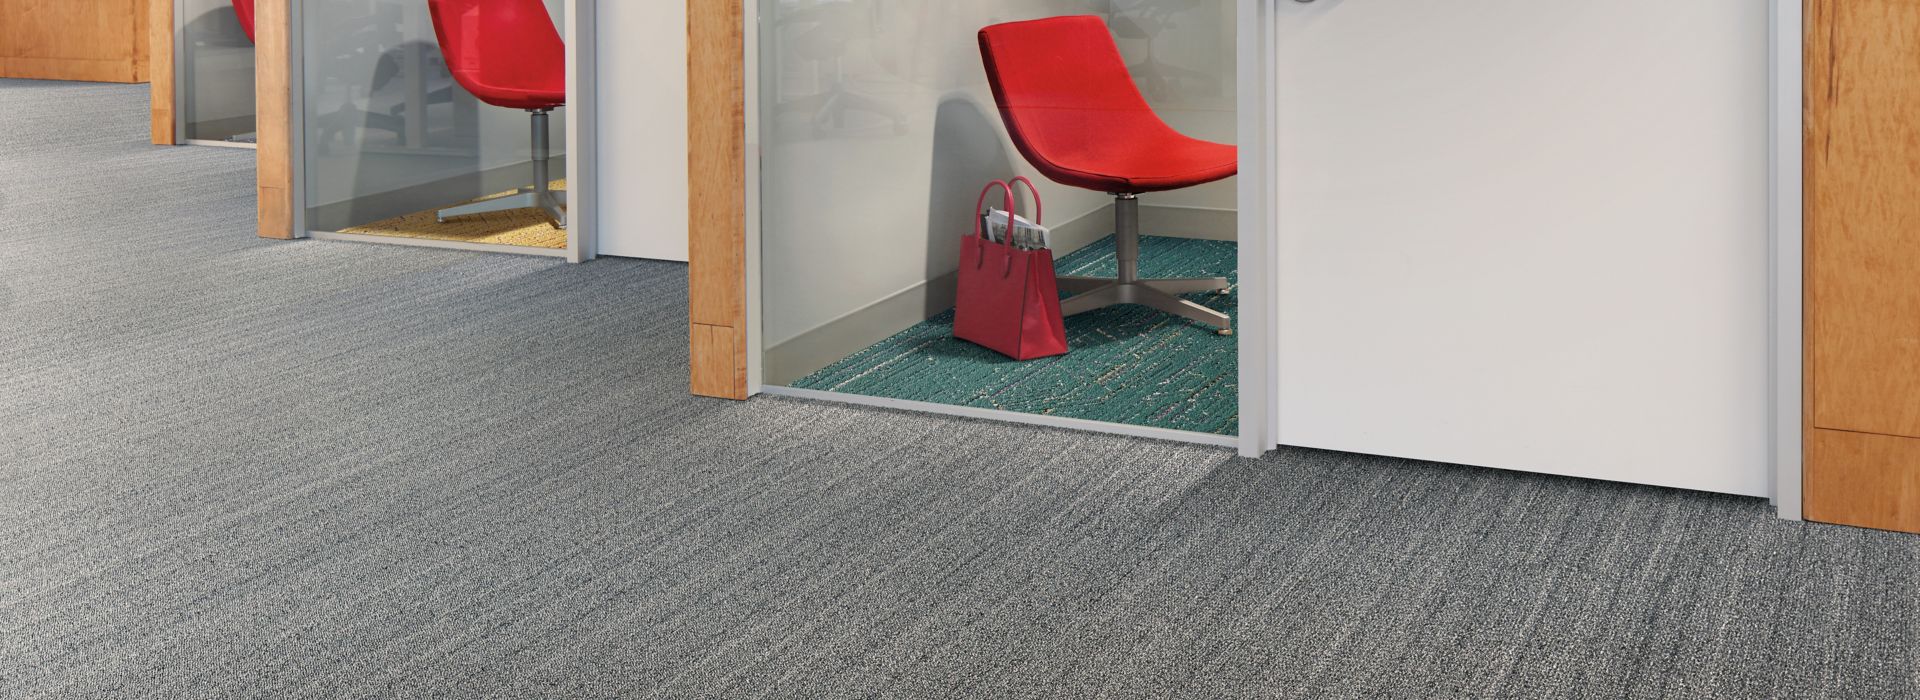 Interface Plain Stitch and Circuit Board plank carpet tile in area with multiple private rooms